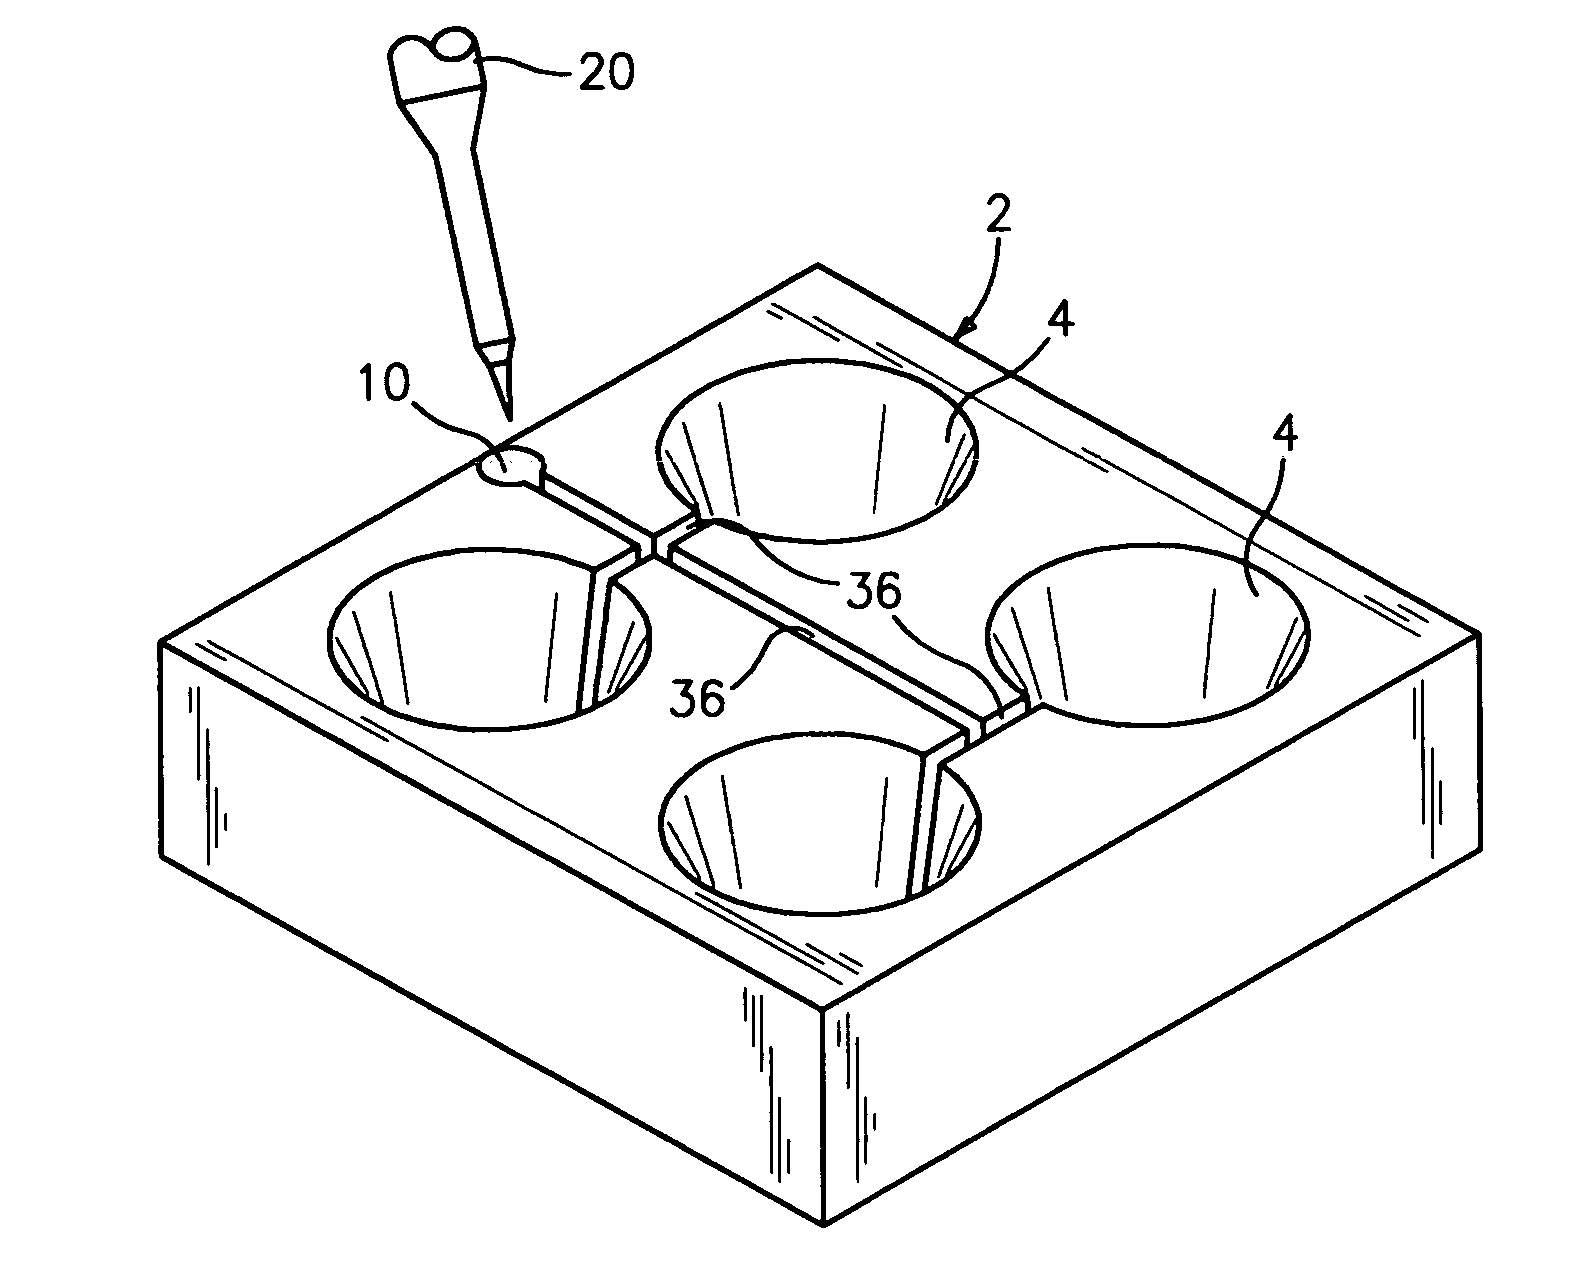 Flooding dish and method for changing media in the dish in the preparation of mammalian specimen culture and for cryo-preservation, freezing, vitrification and the thawing and warming of such specimens